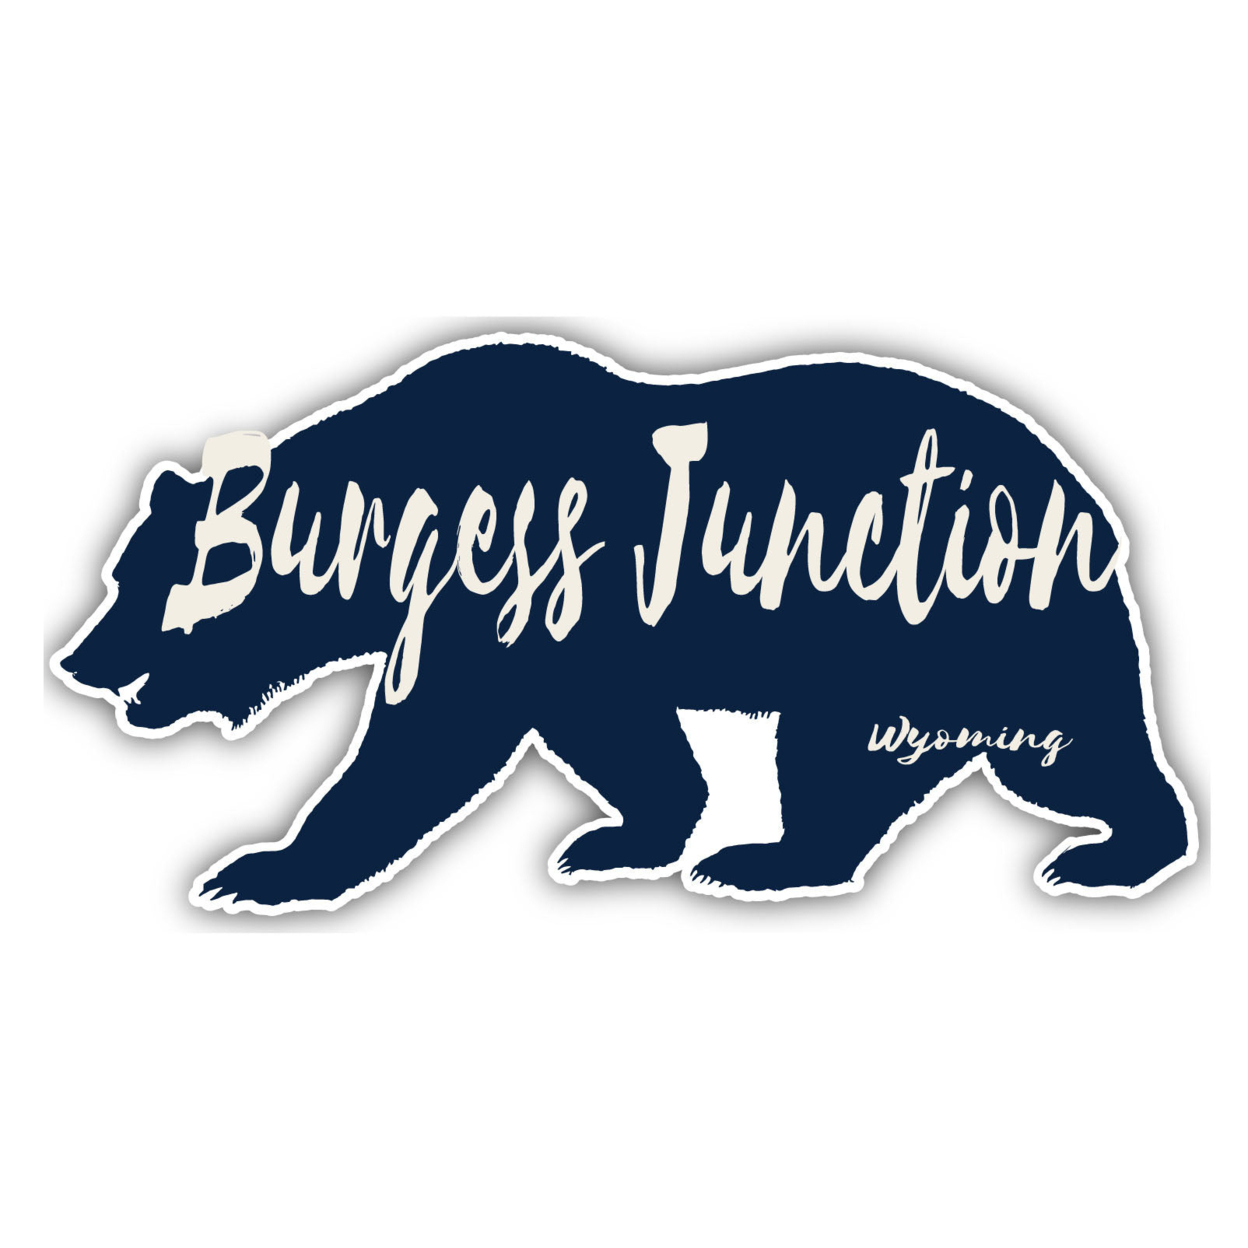 Burgess Junction Wyoming Souvenir Decorative Stickers (Choose Theme And Size) - Single Unit, 2-Inch, Adventures Awaits